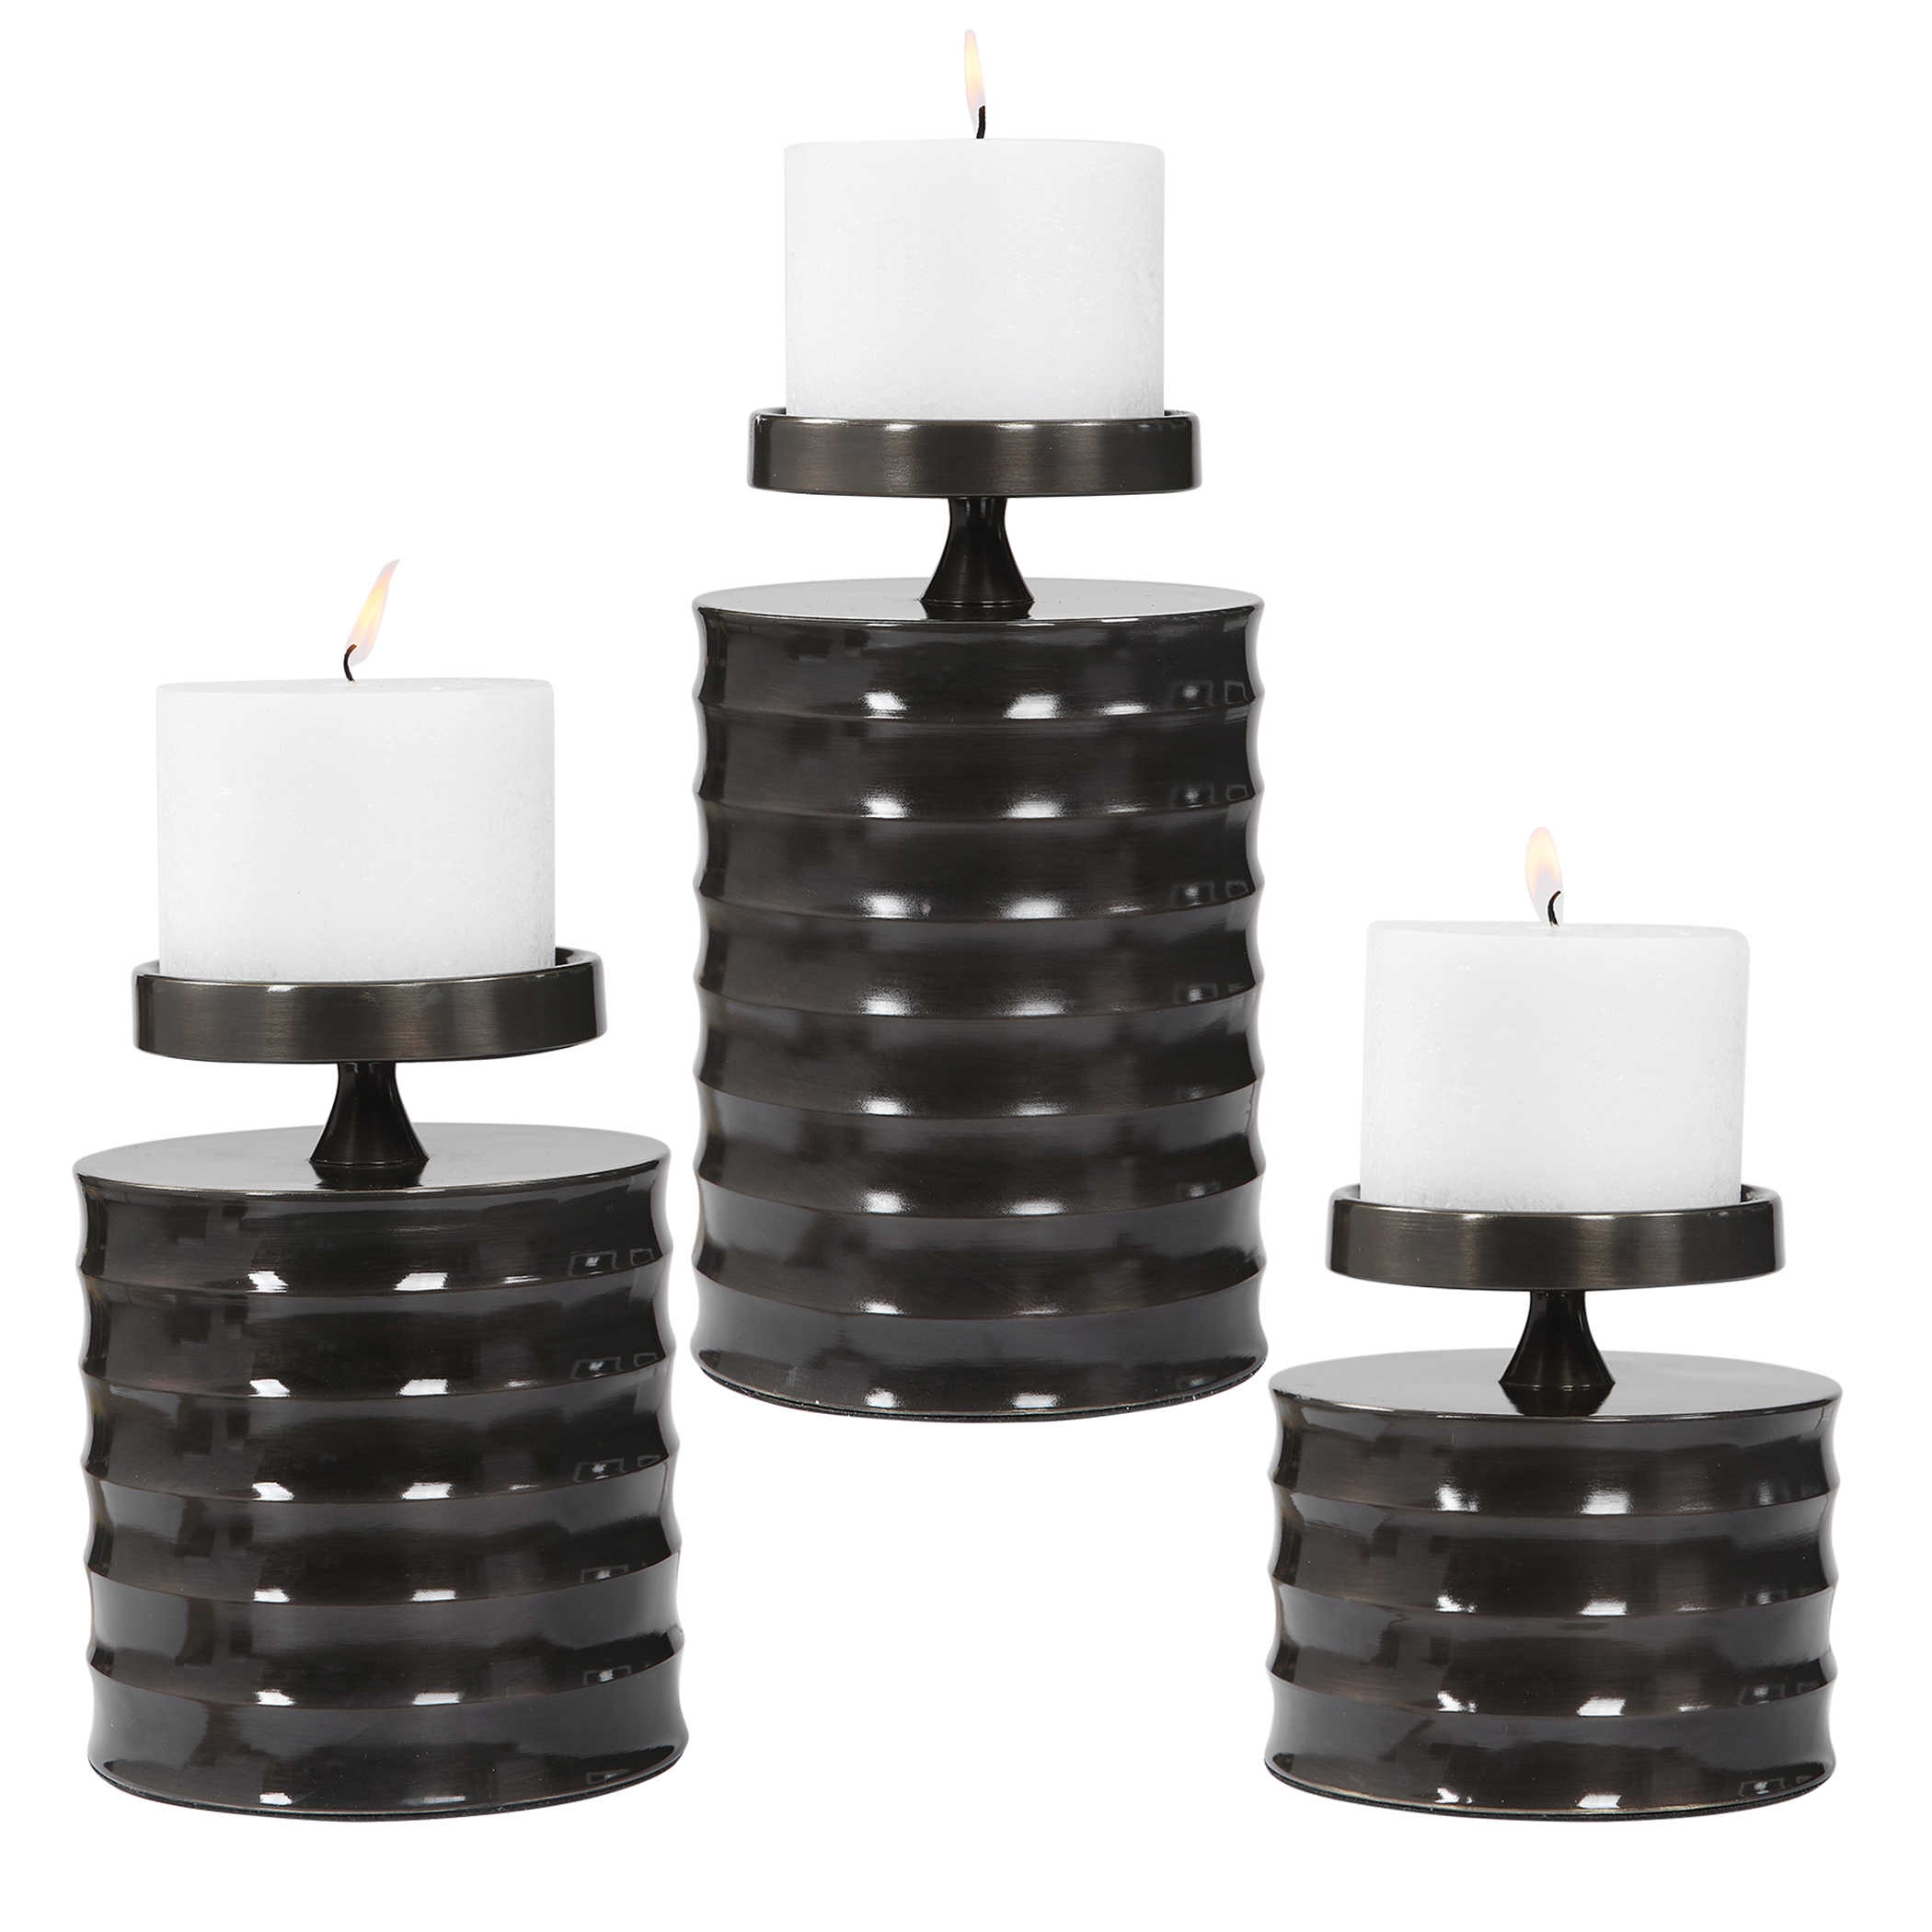 PERNILLE CANDLEHOLDERS, S/3 - Image 0